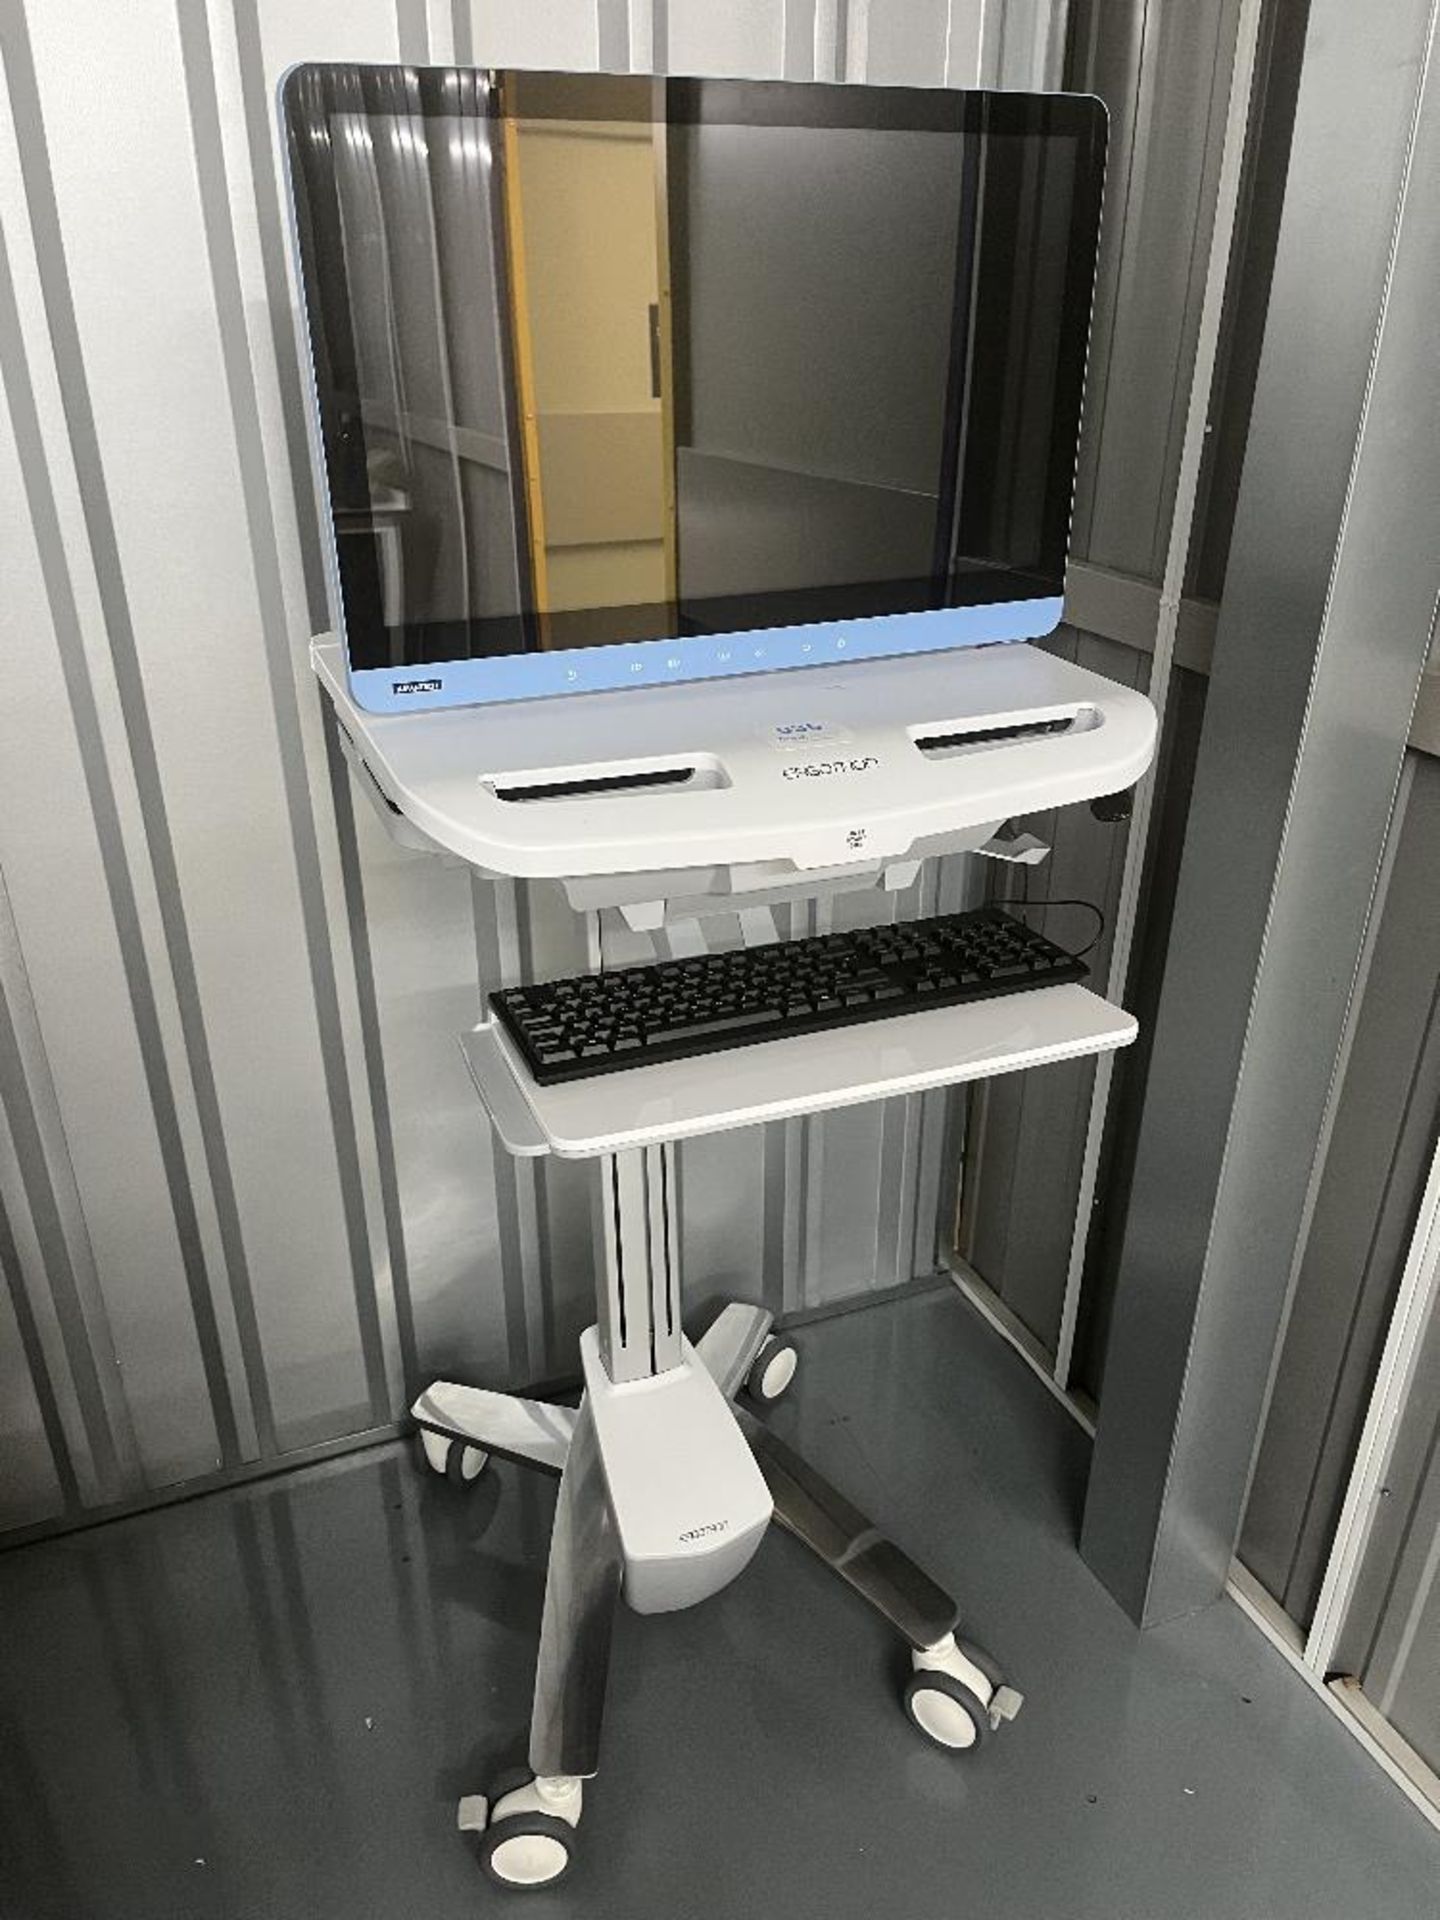 Ergotron Styleview Cart Type SV41-6200-0 Full Featured Medical Cart with Advantech POC-624-01 AIO PC - Image 8 of 9